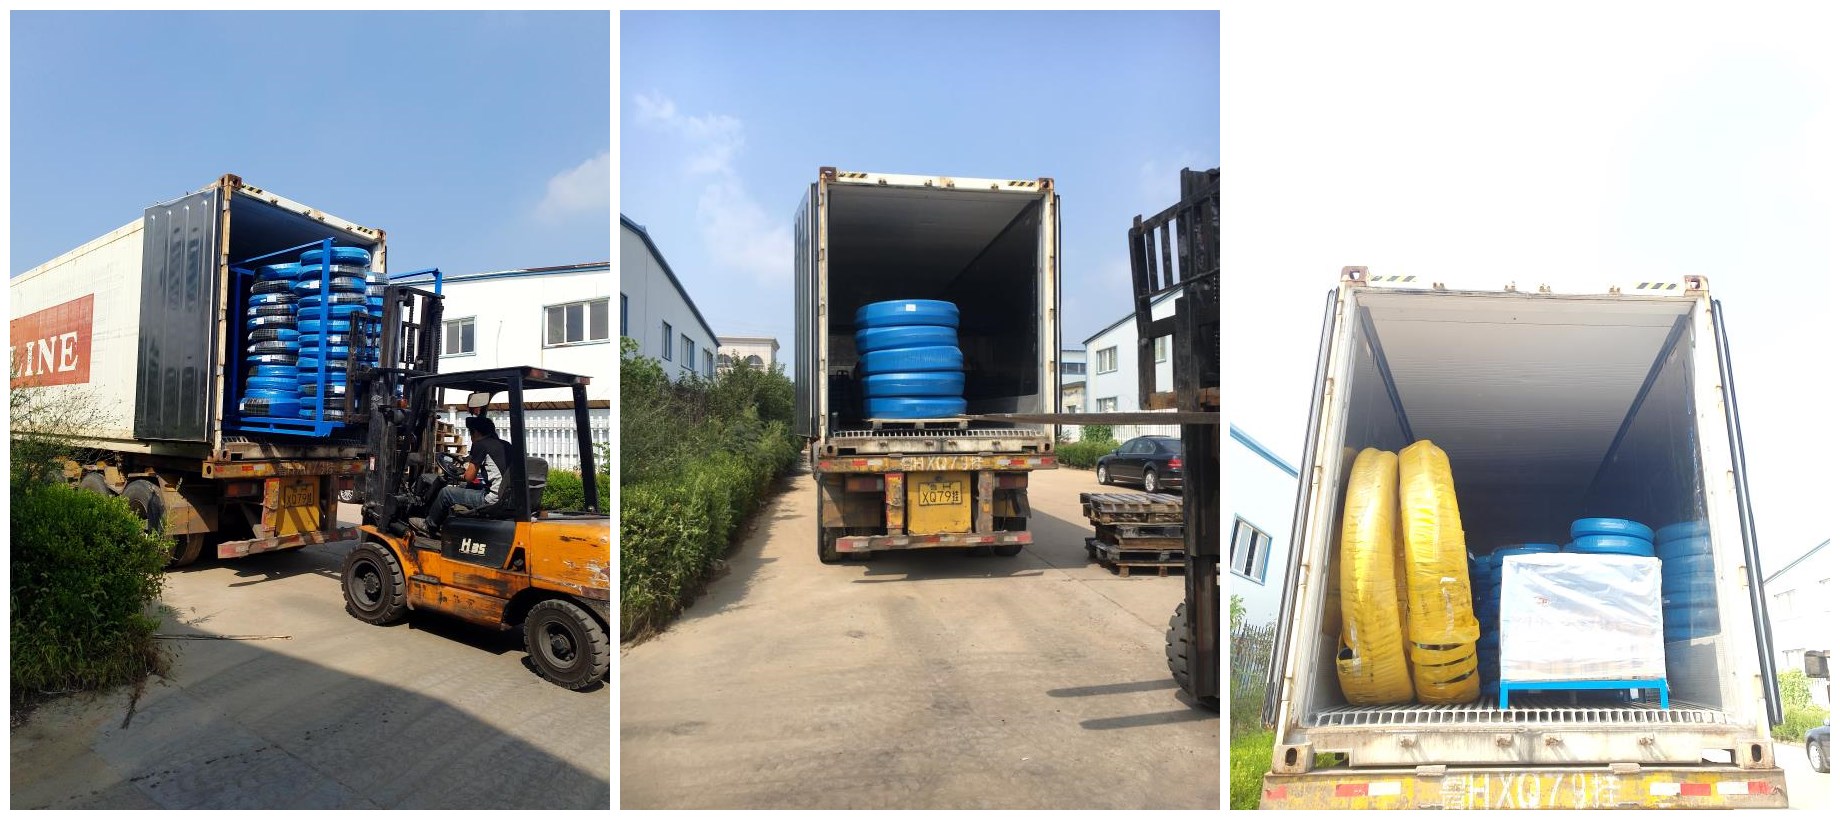 Our company export hydraulic hose has been successfully loaded